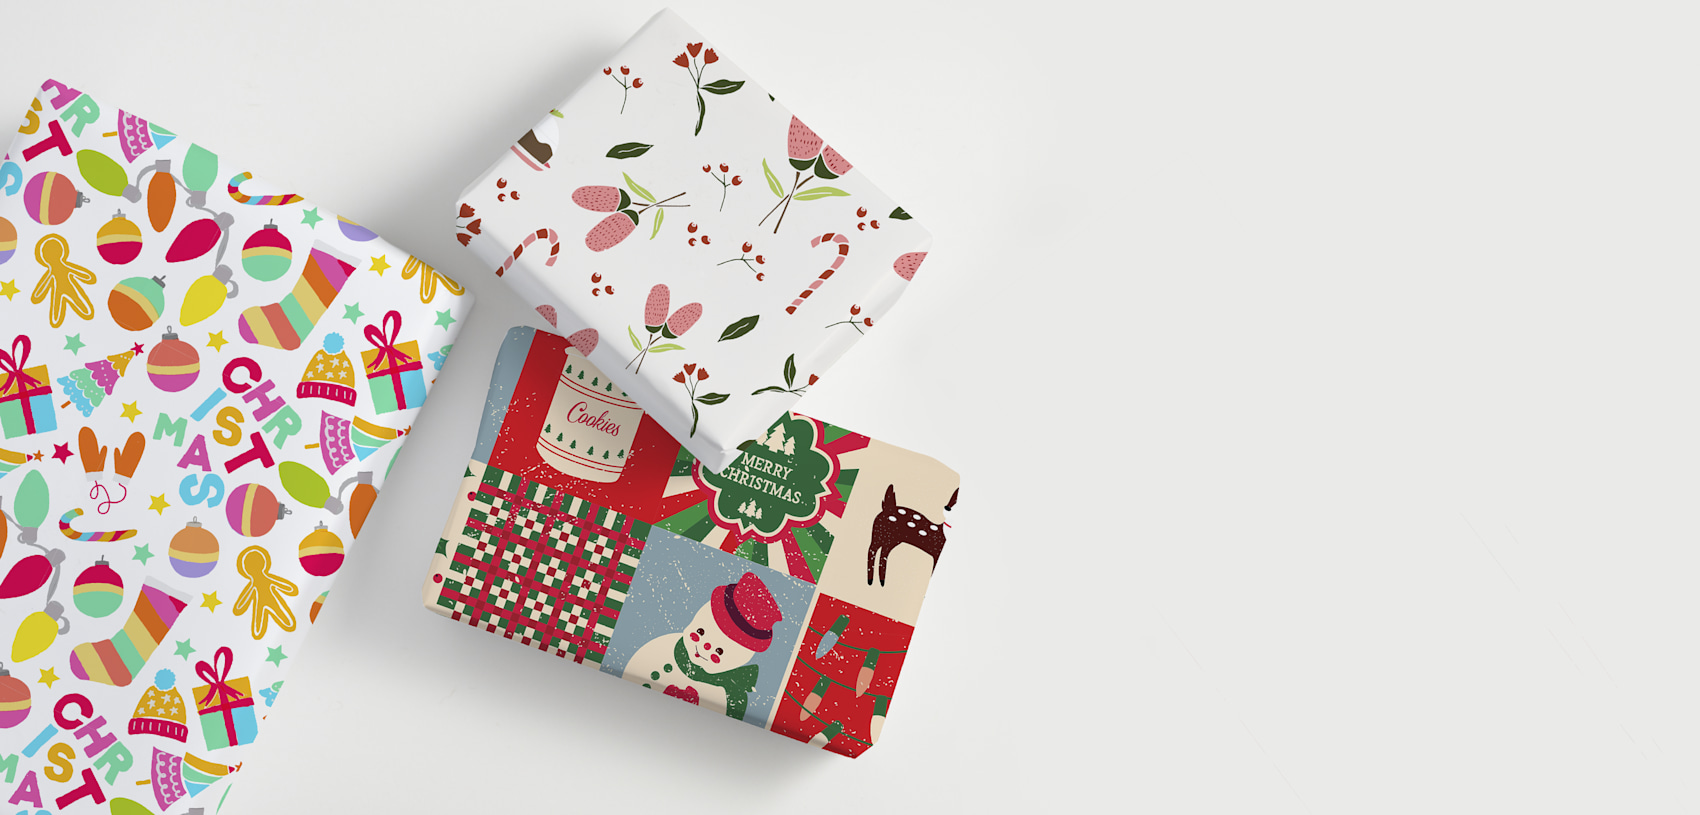 Larger version: Wrapping Papers